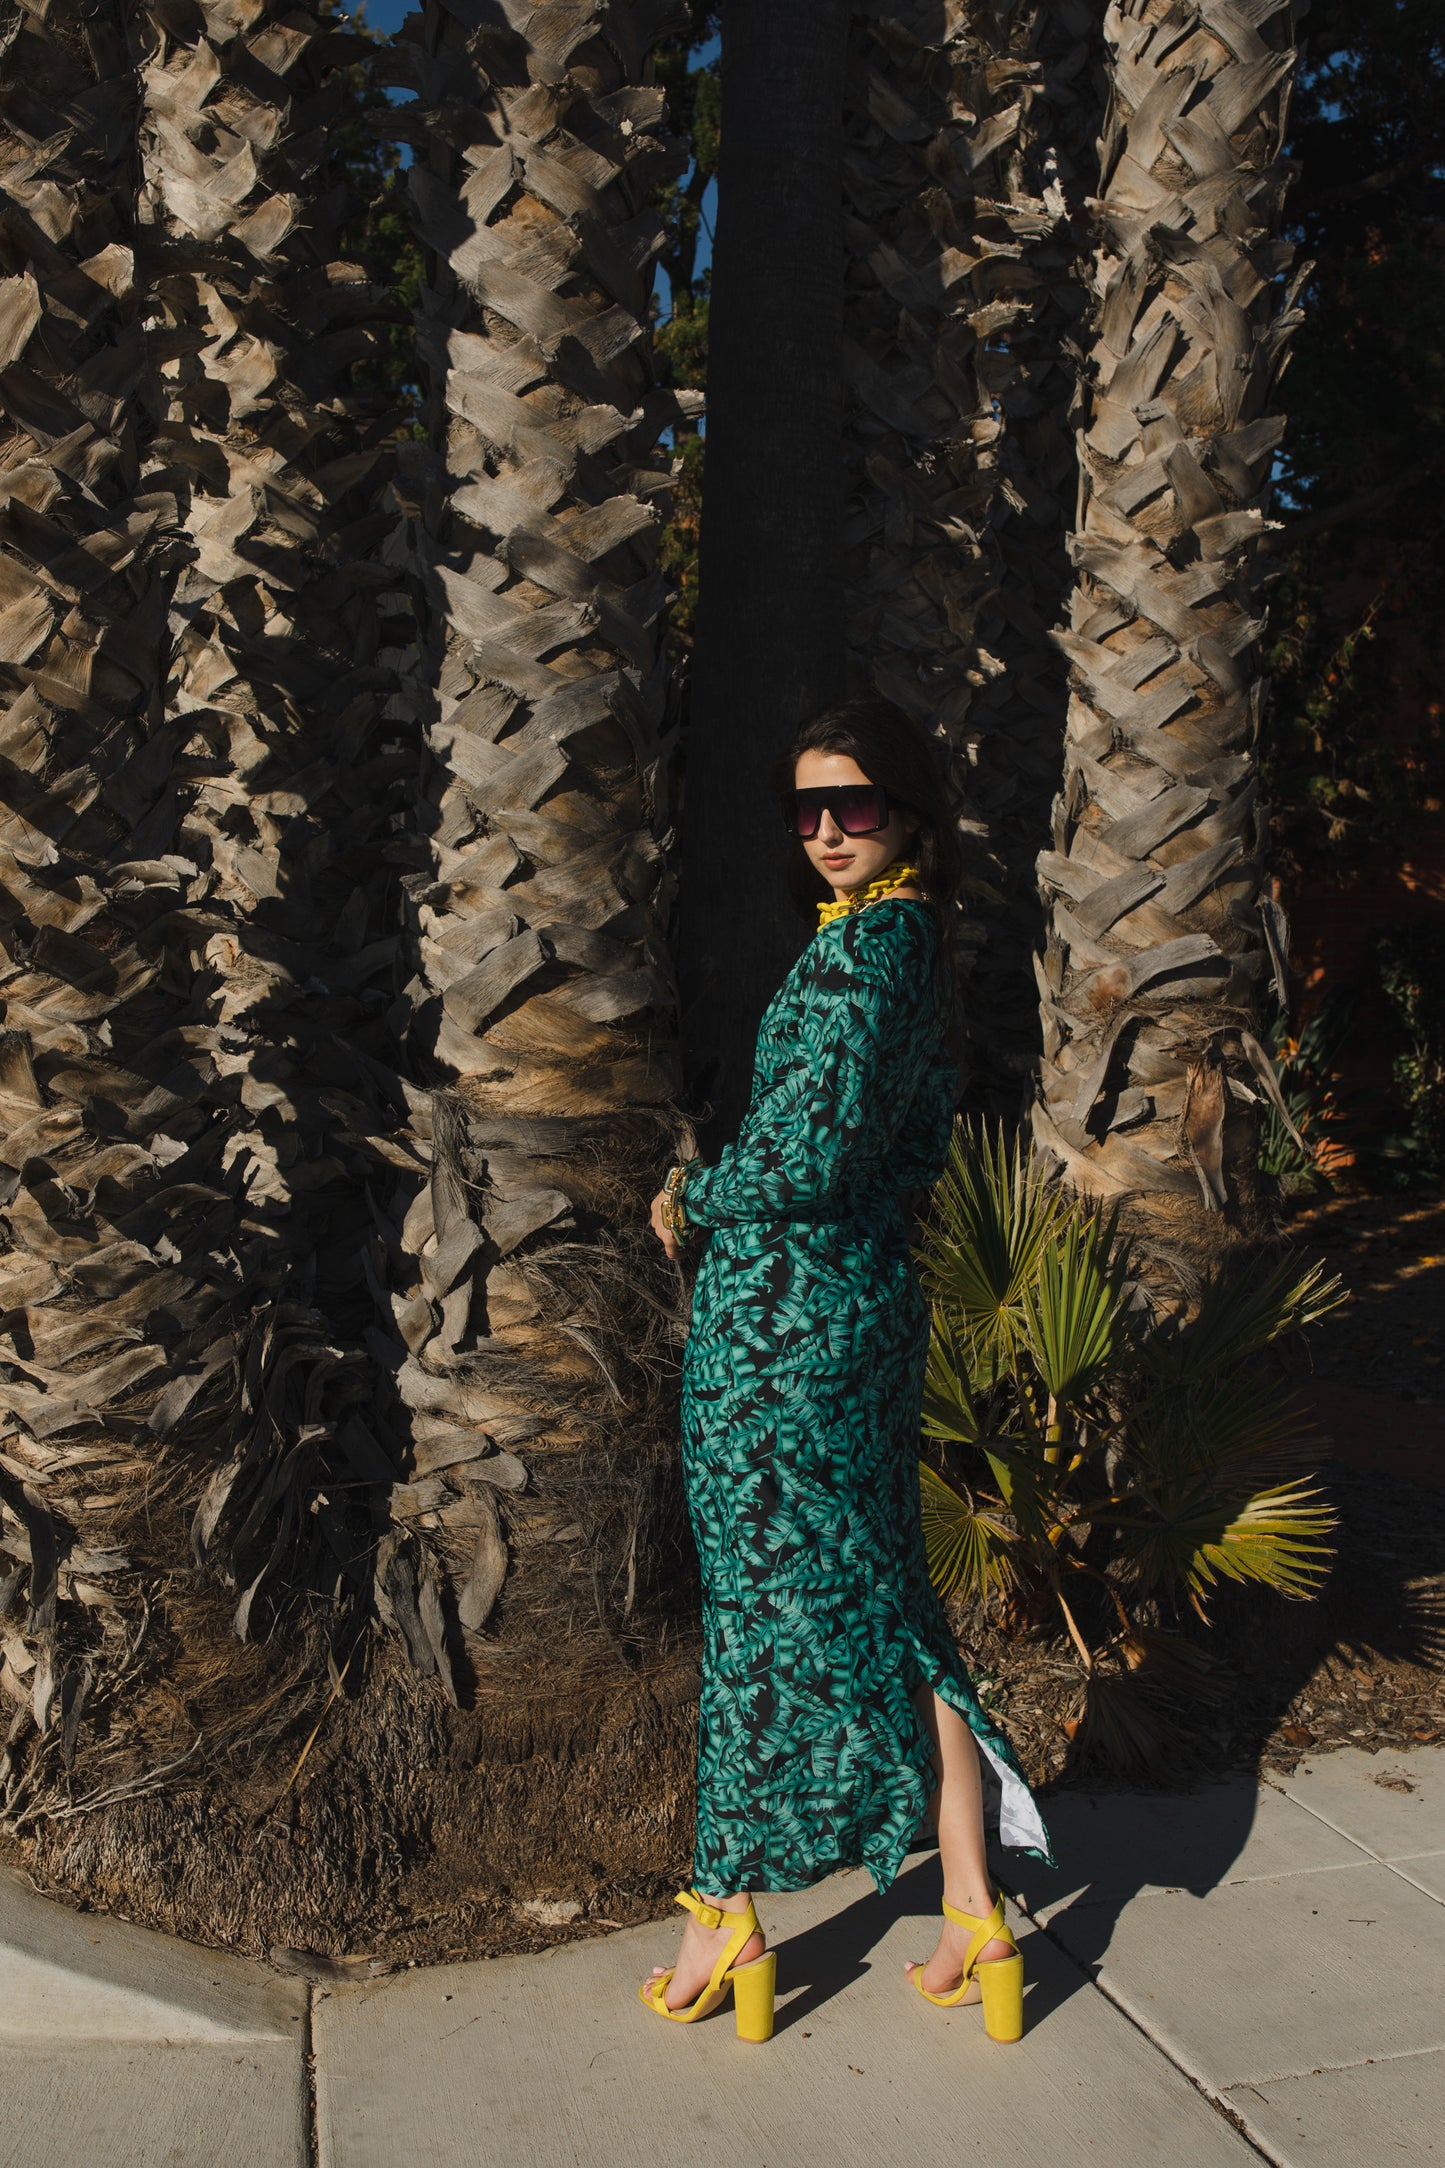 jennafer grace Congo twist dress black with green botanical print old hollywood glam evening dress boho bohemian batwing cocktail party evening dress gown handmade in California USA